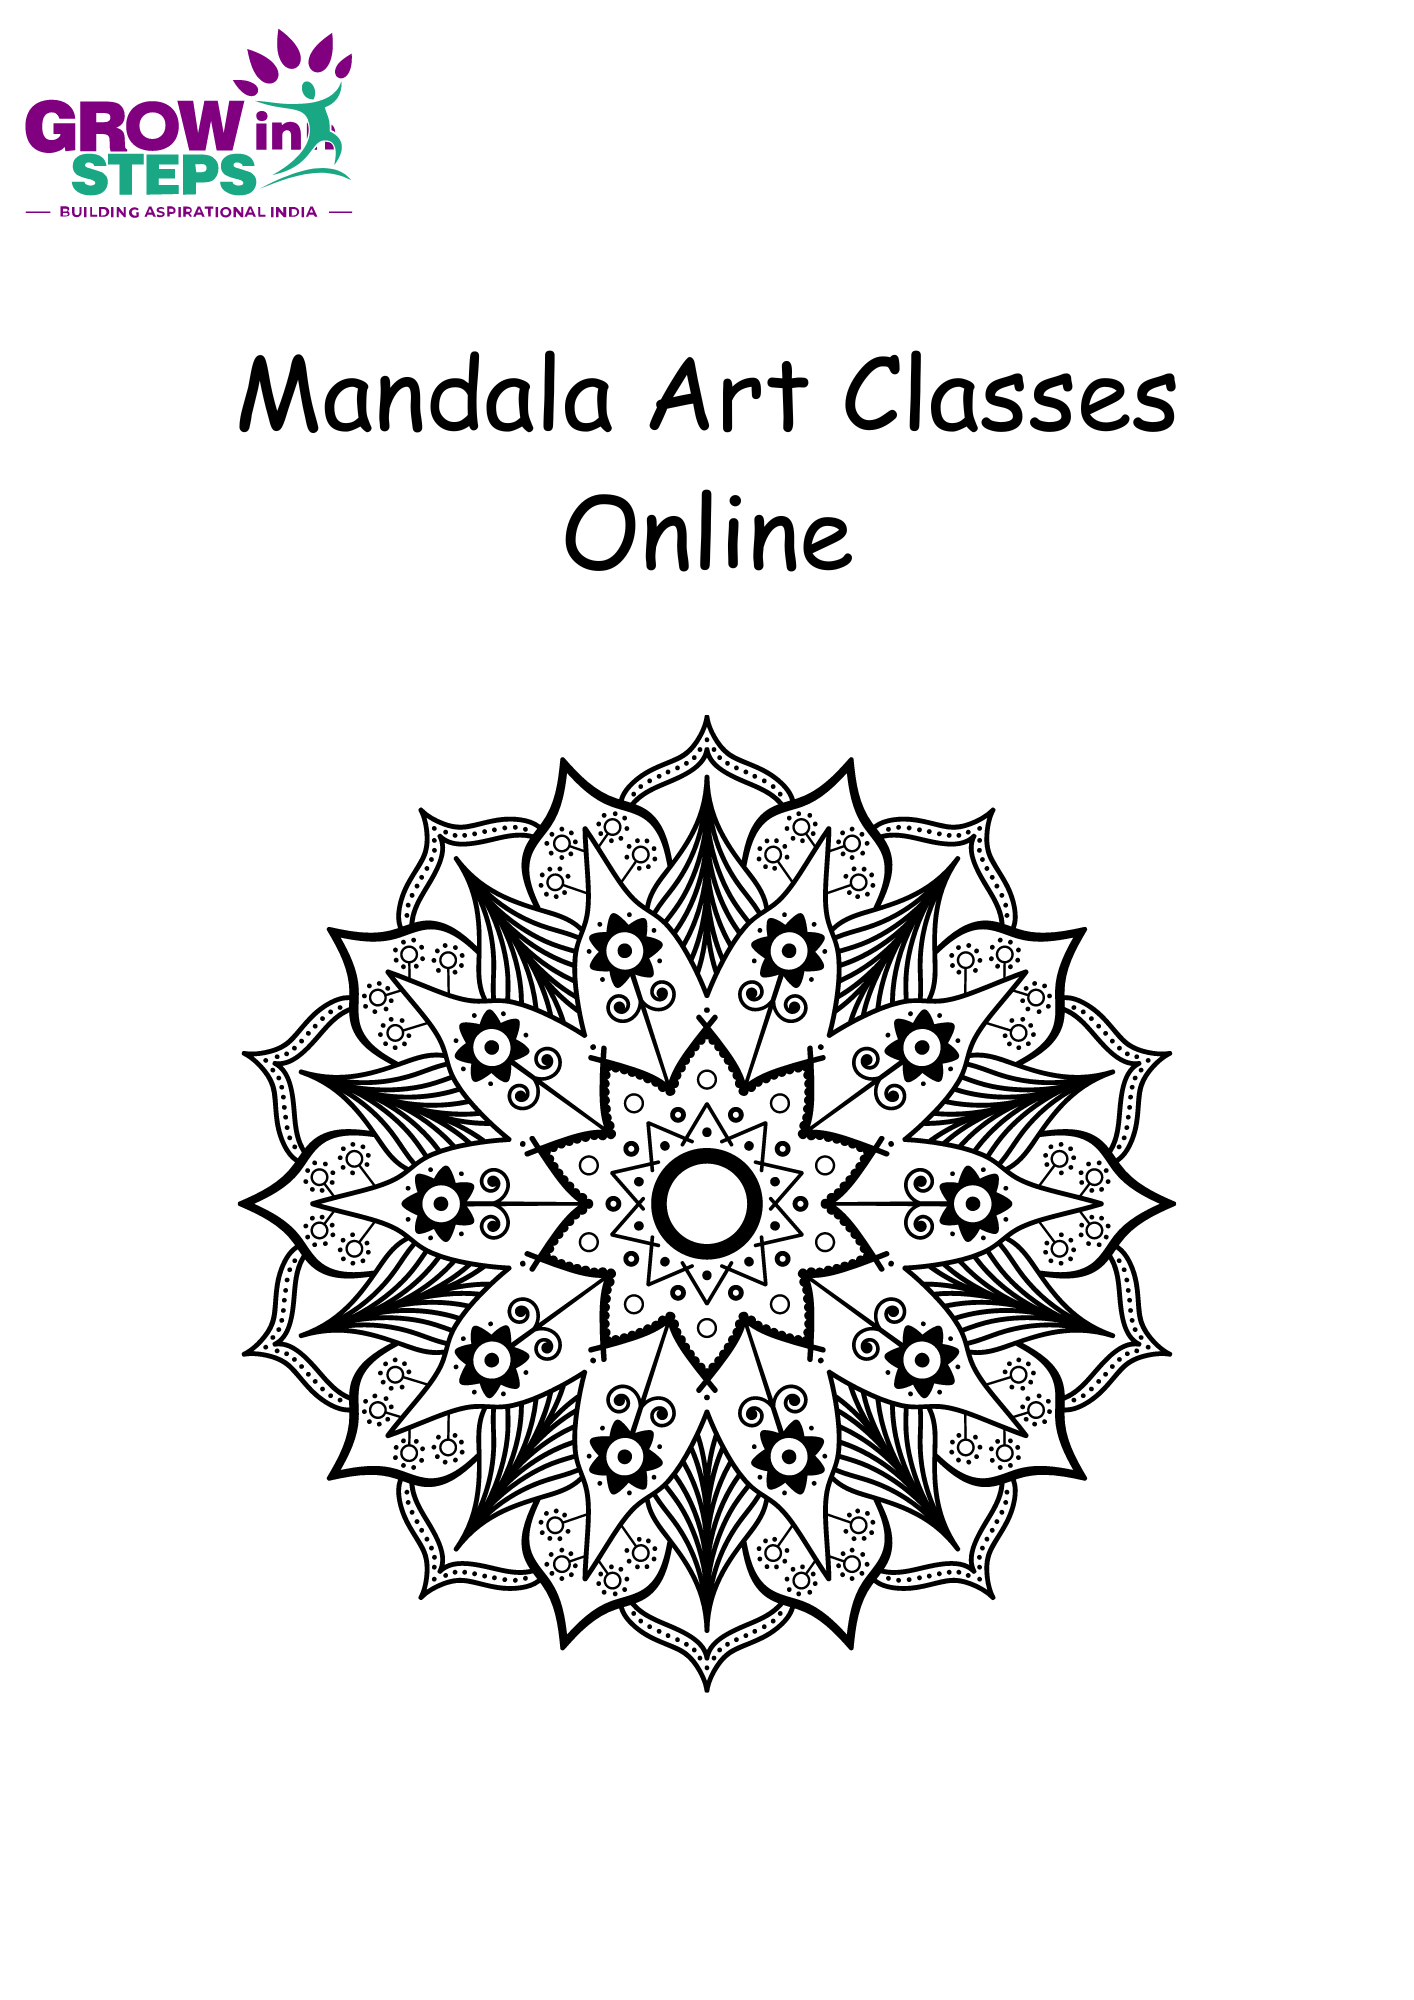 The Ultimate Guide to Mandala Art: Online Classes for Beginners